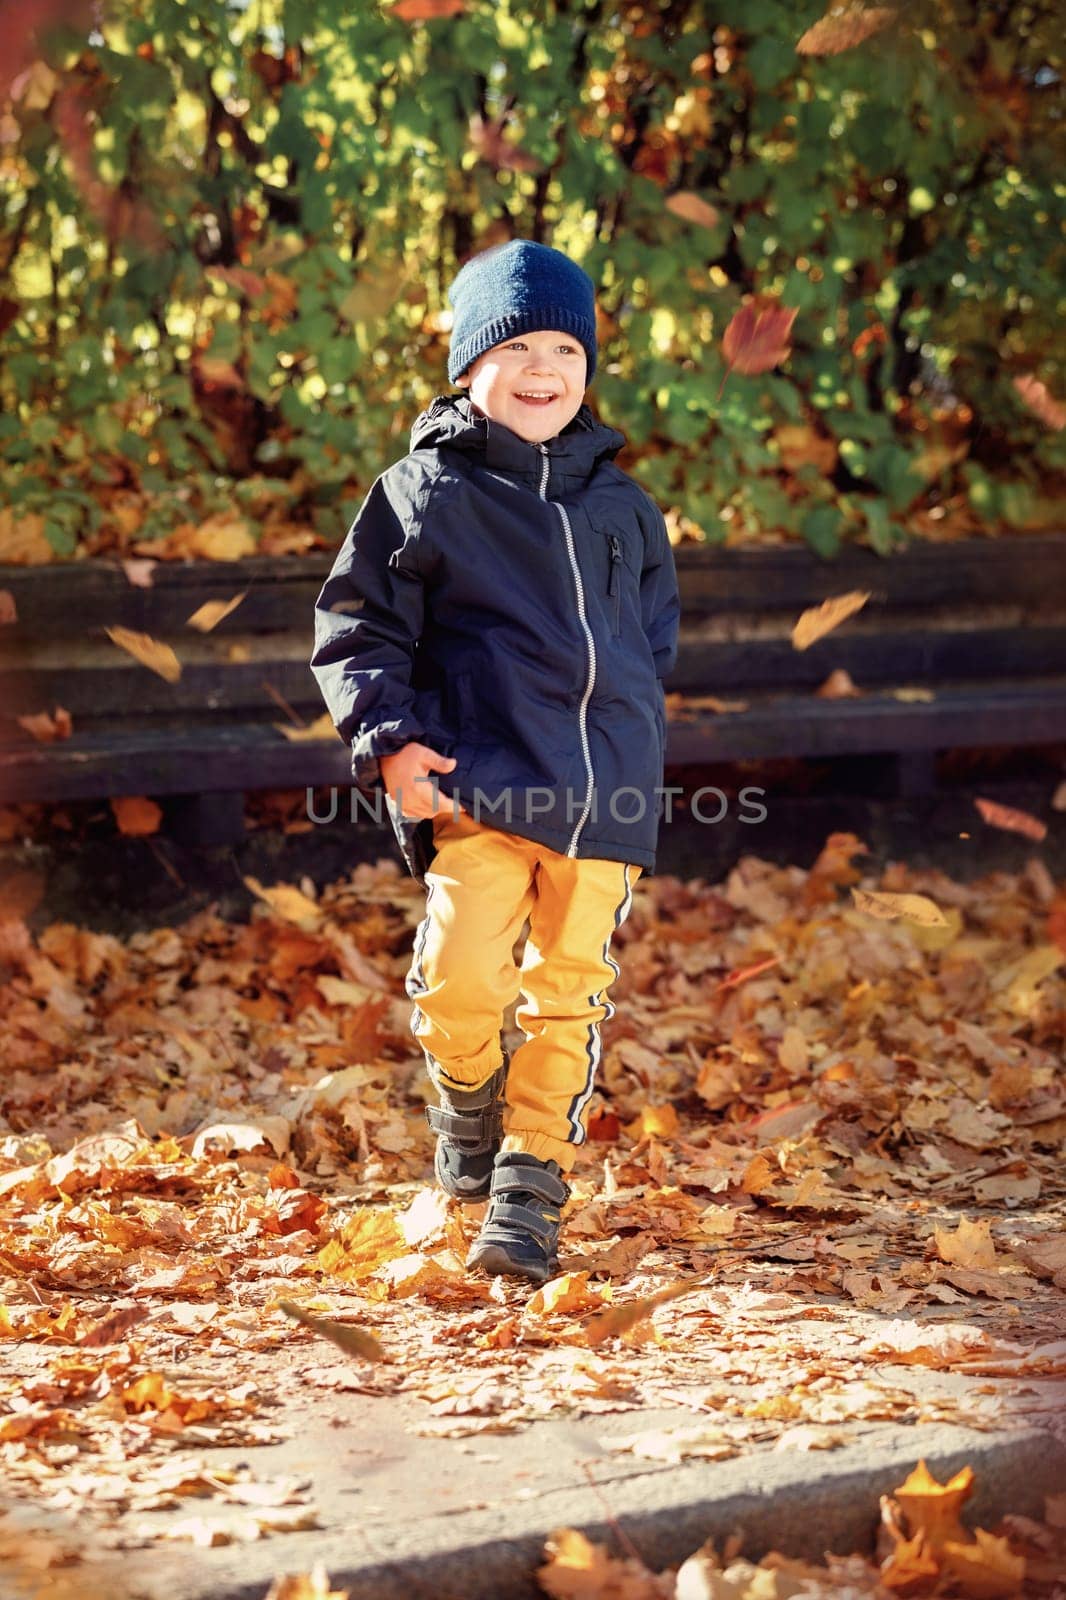 Happy toddler baby boy having fun, playing with fallen leaves in autumn park. by Lincikas